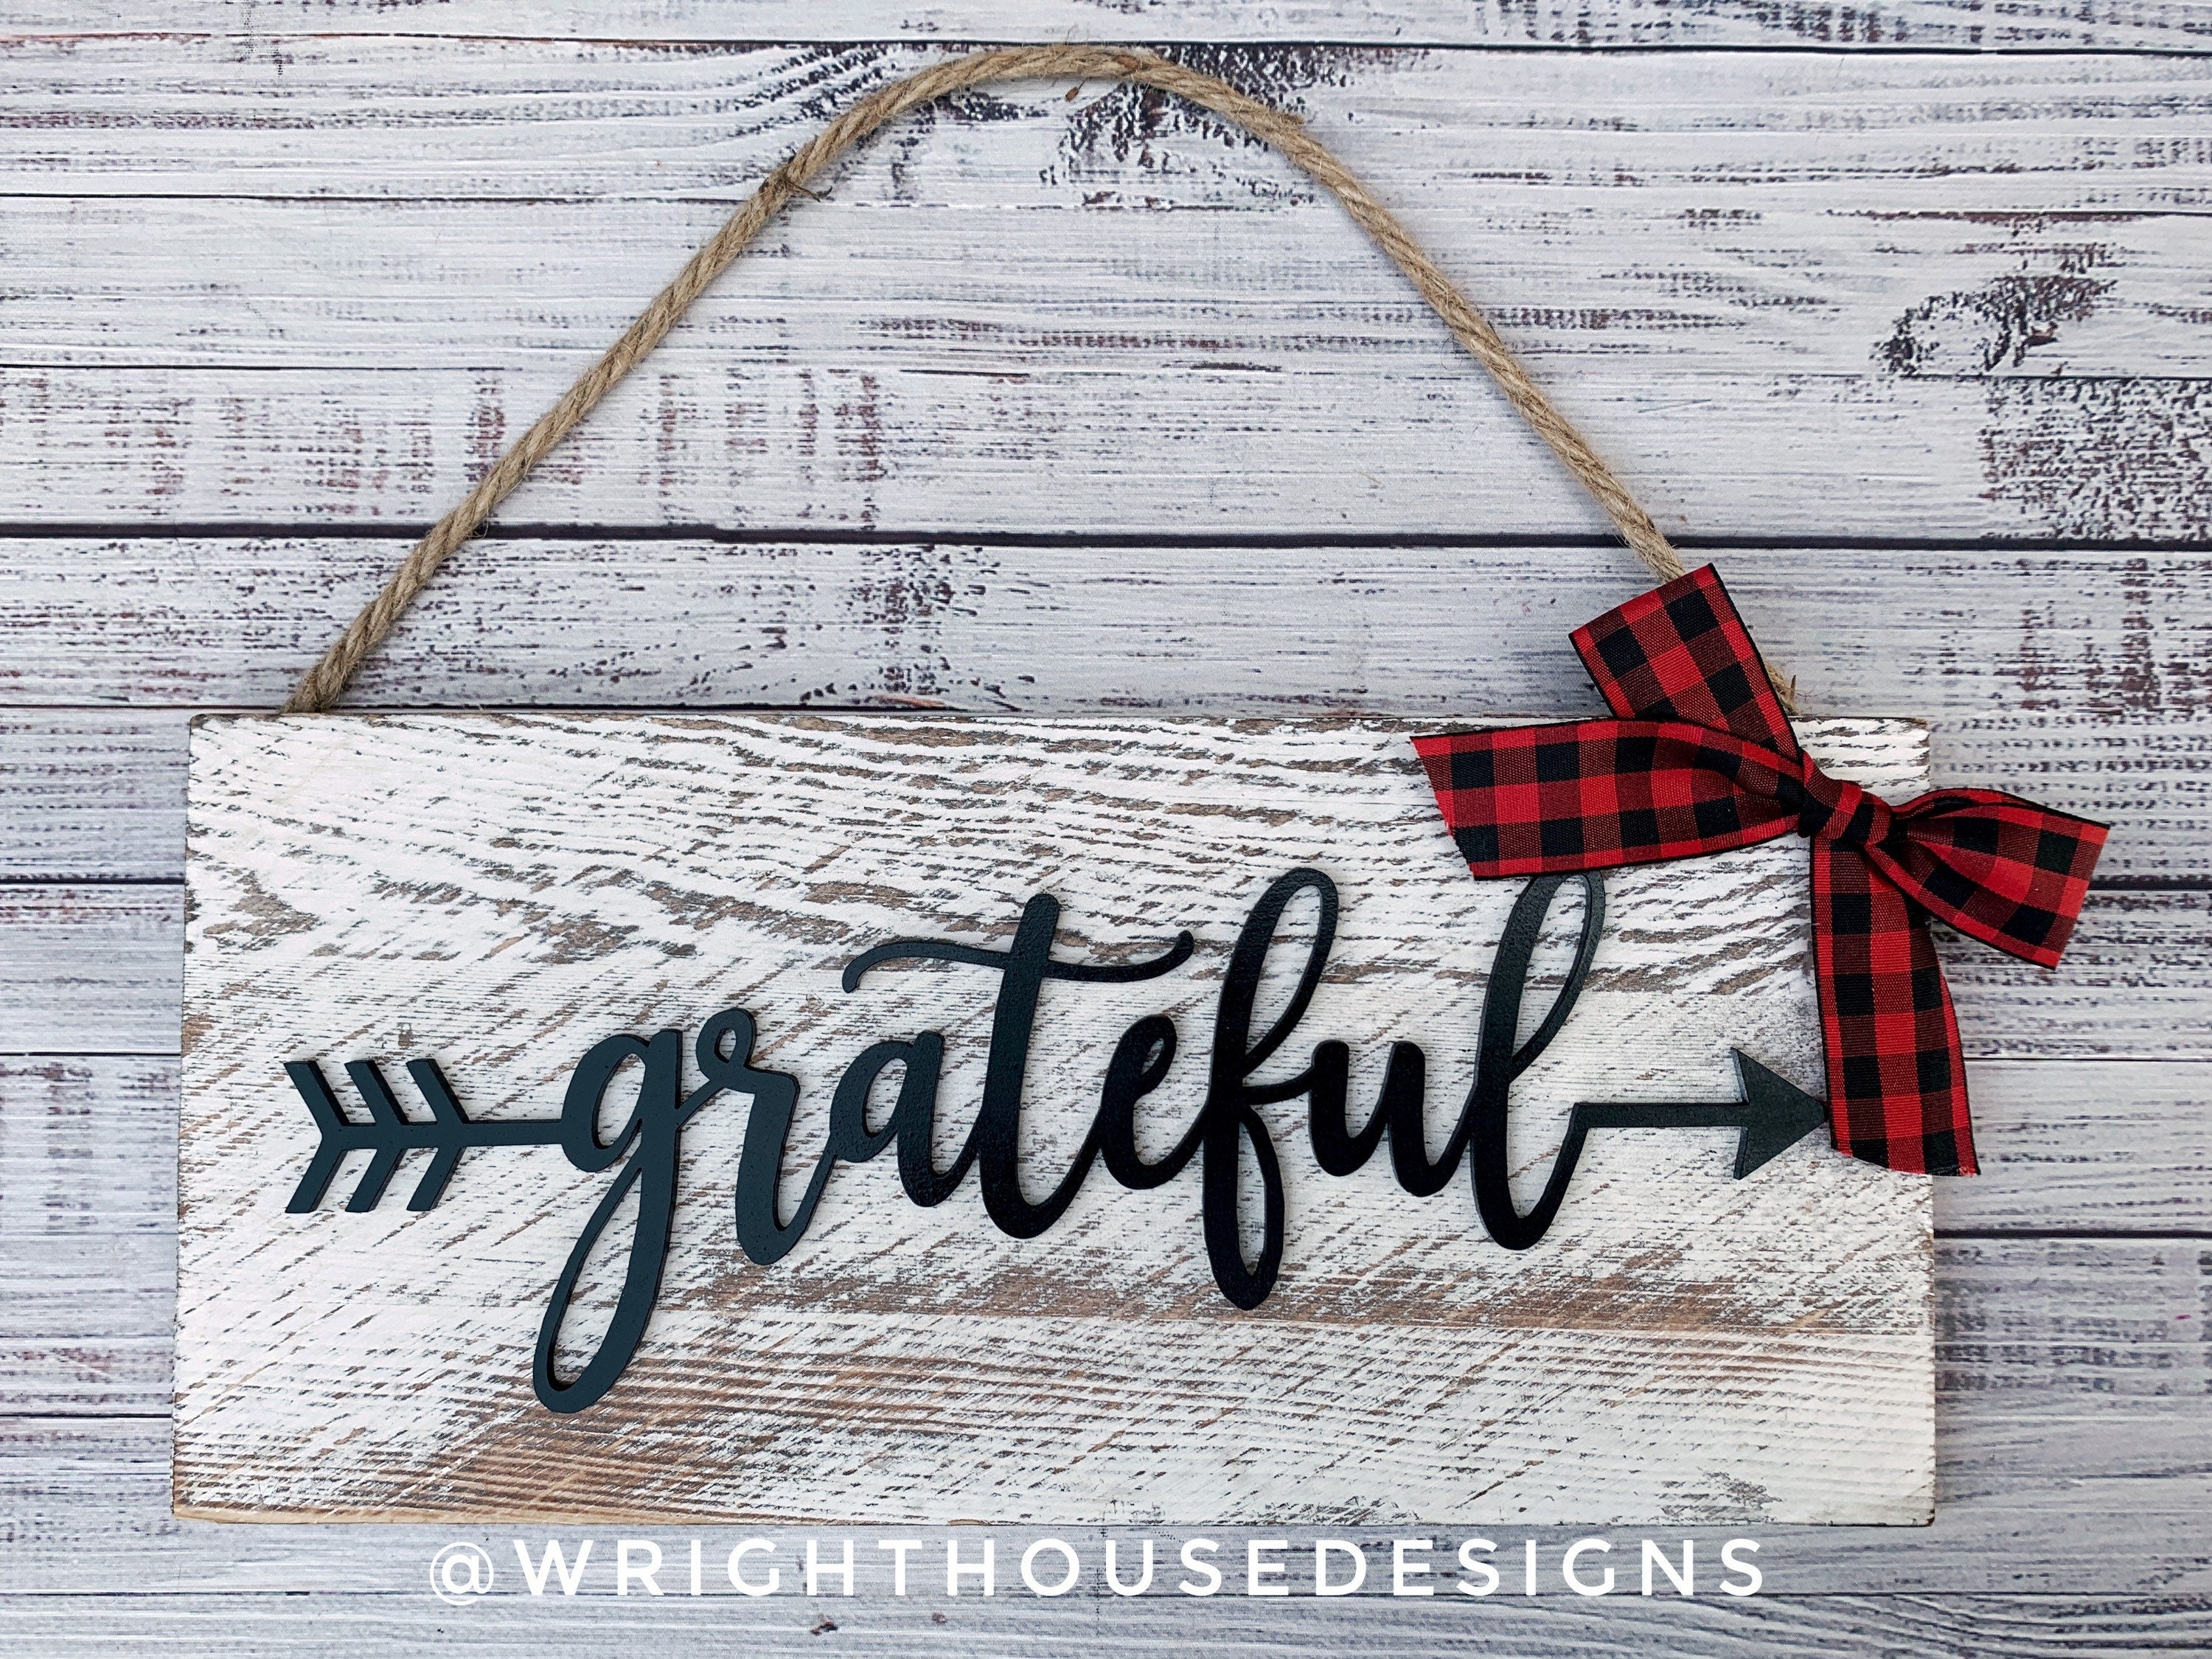 Grateful Arrow Word Art - Rustic Farmhouse - Whitewash Reclaimed Wood Plank Board Sign - Wooden Wall Art - Home Decor and She Shed Signs